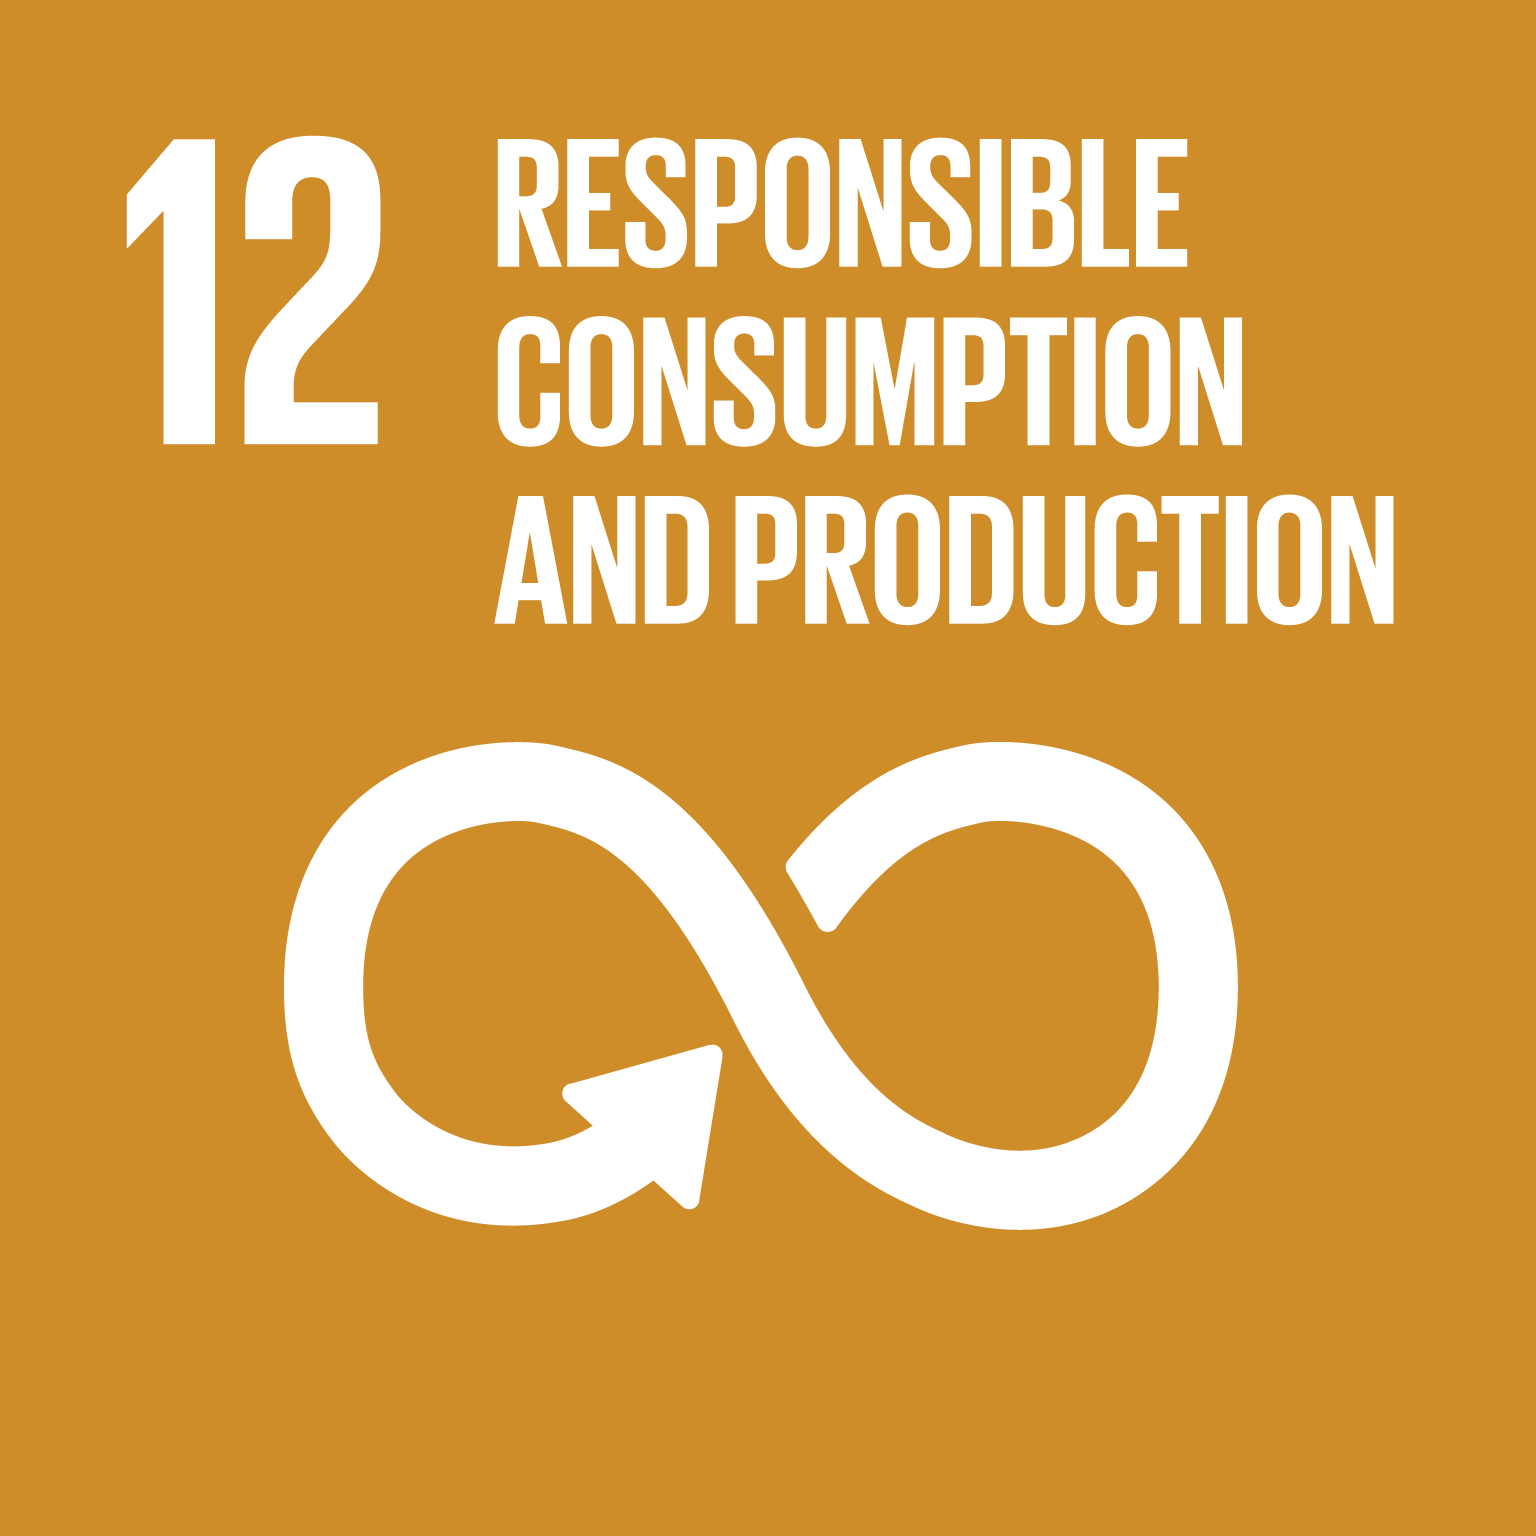 Sustainable development goals : Responible consumption and production